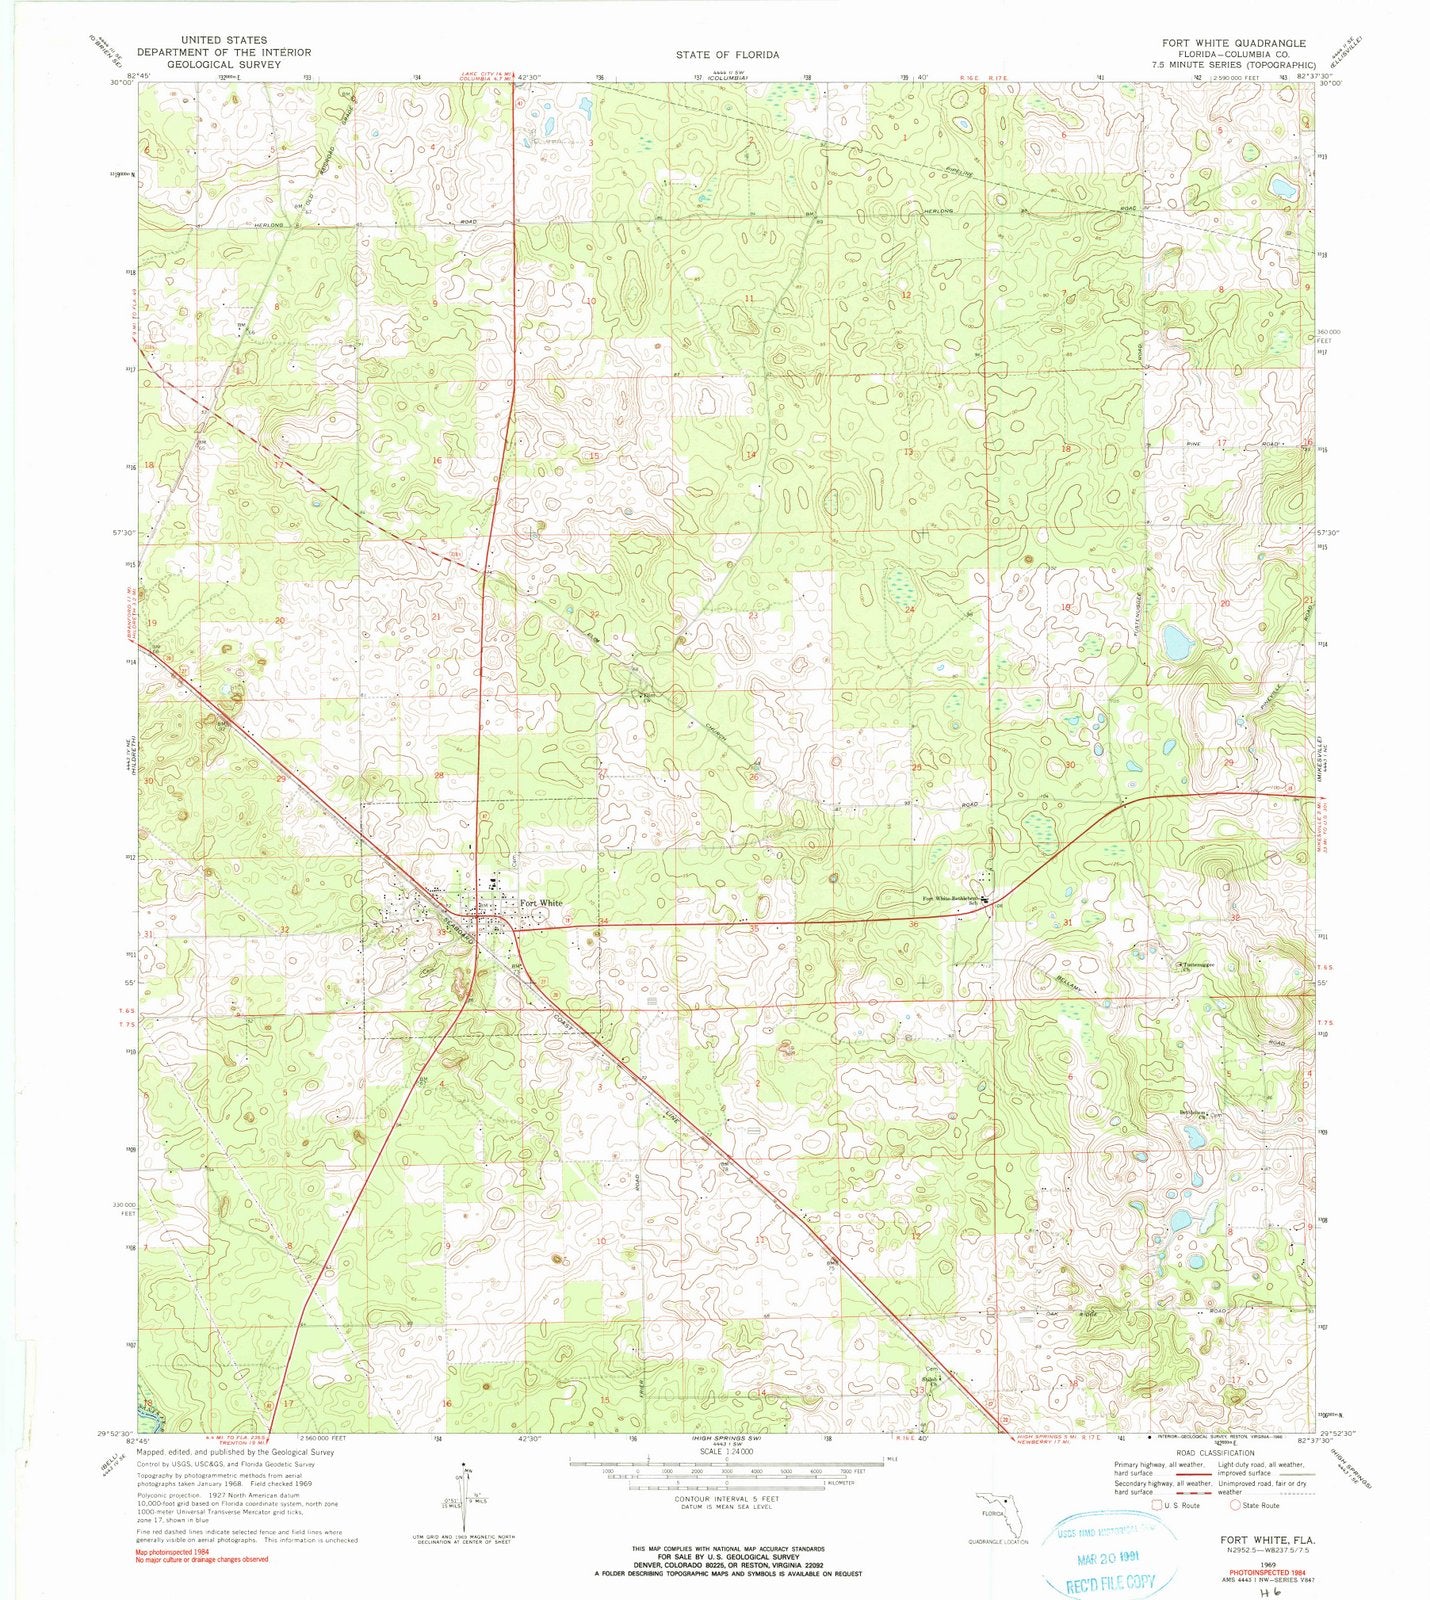 1969 Fort White, FL - Florida - USGS Topographic Map